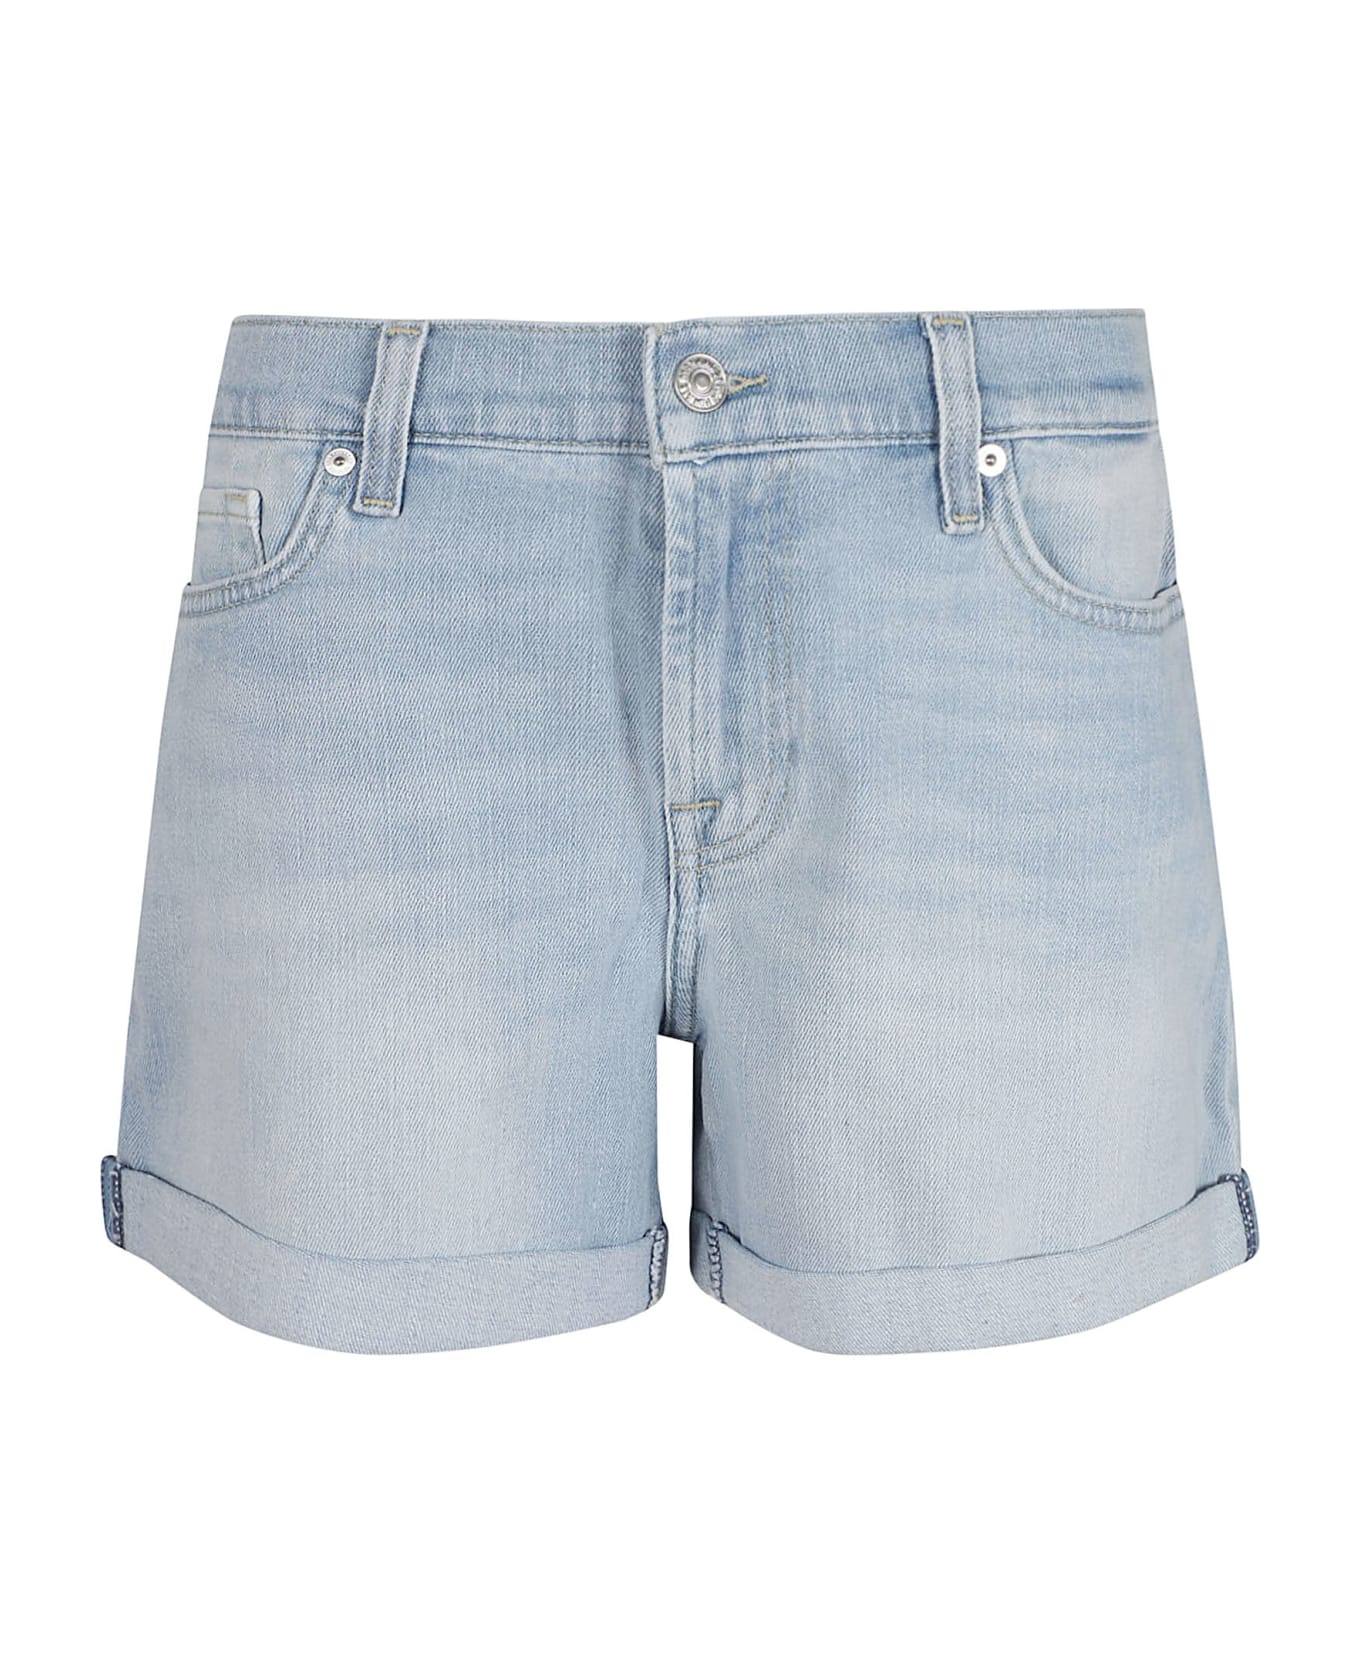 7 For All Mankind Mid Roll Shorts Soul - Light Blue